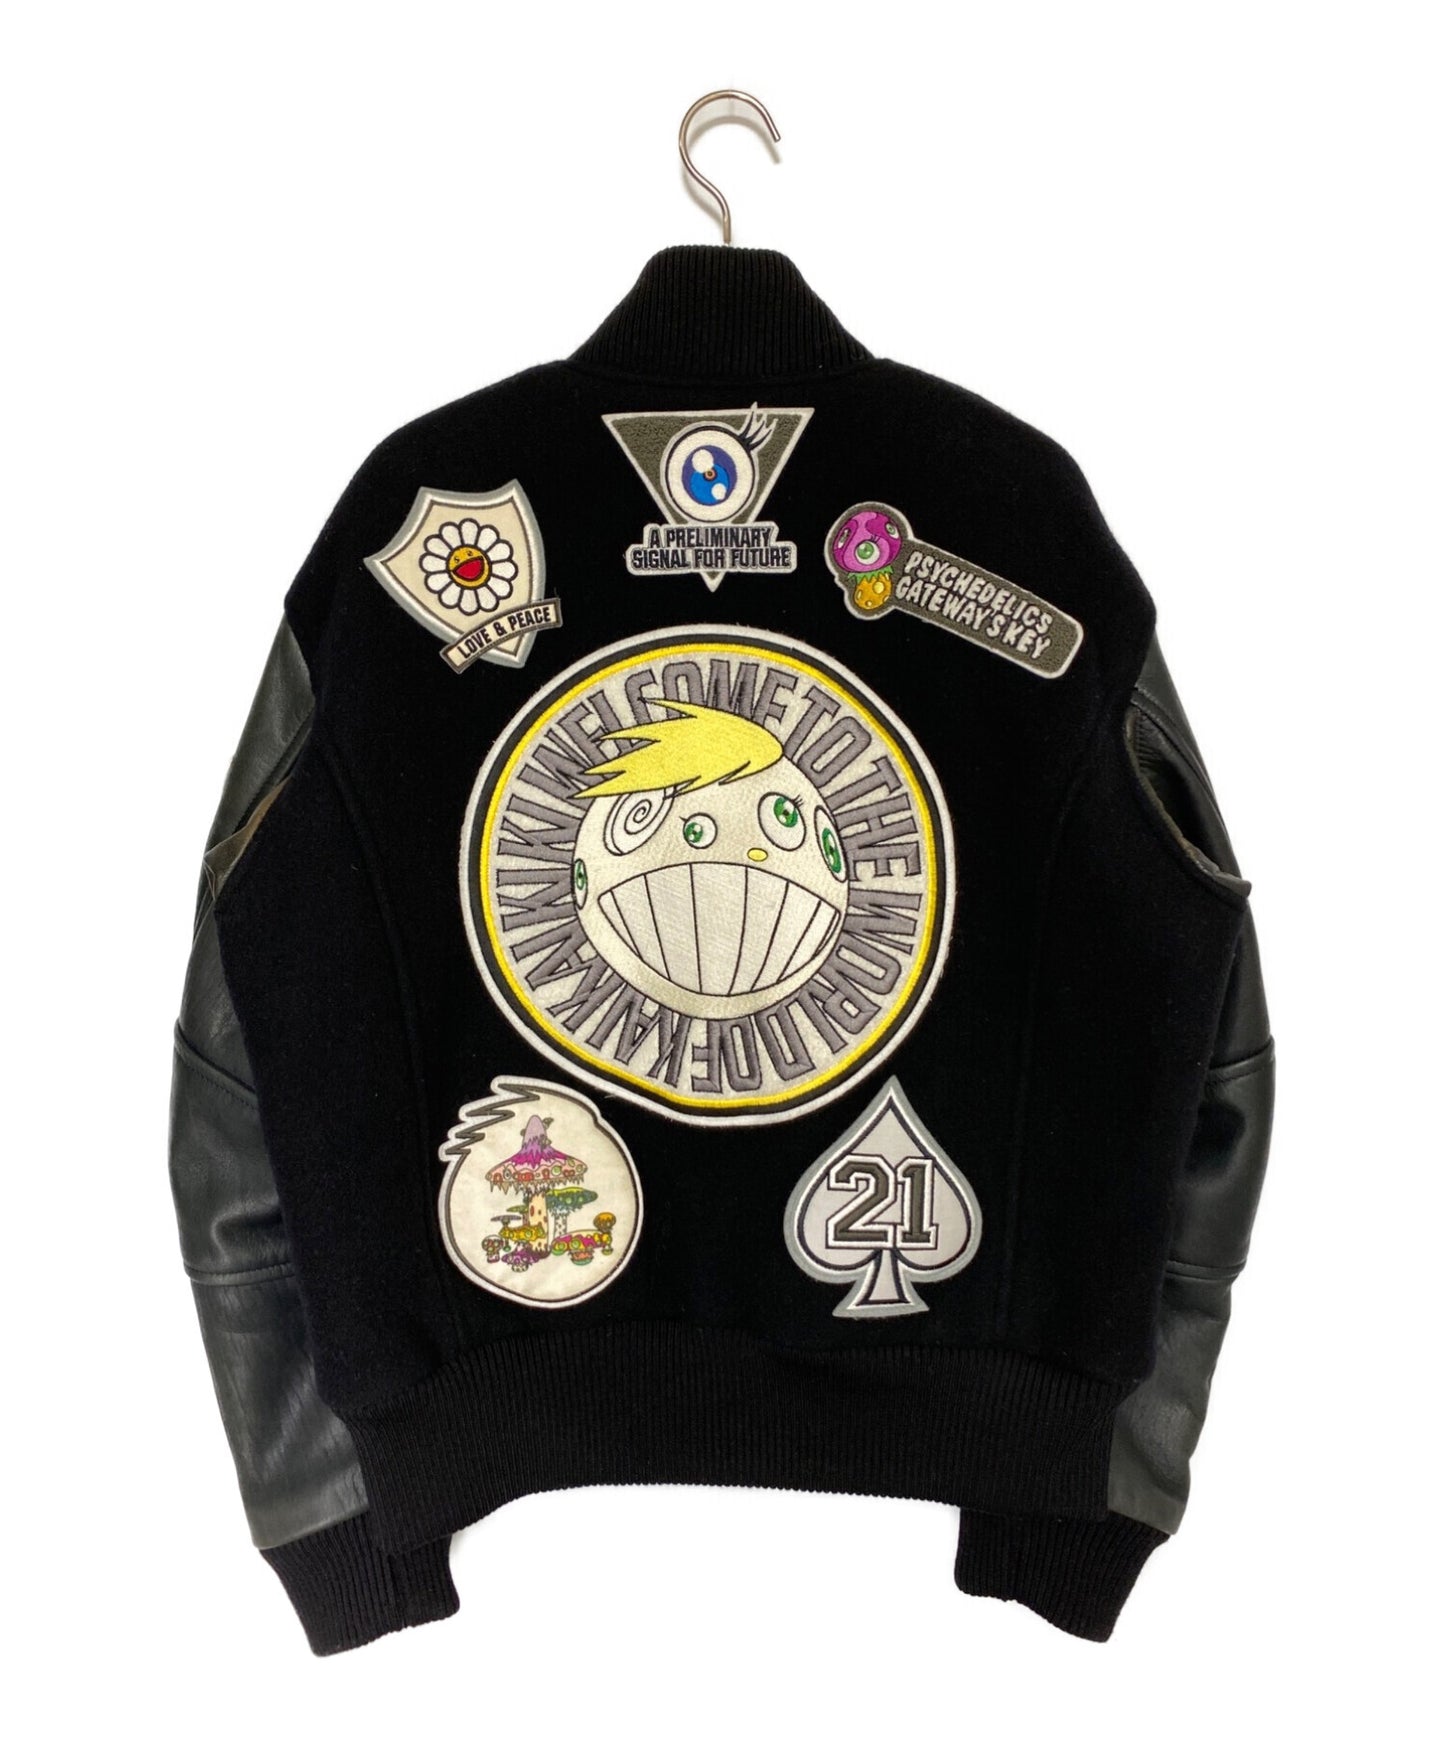 How to repurpose letterman jacket patches! 